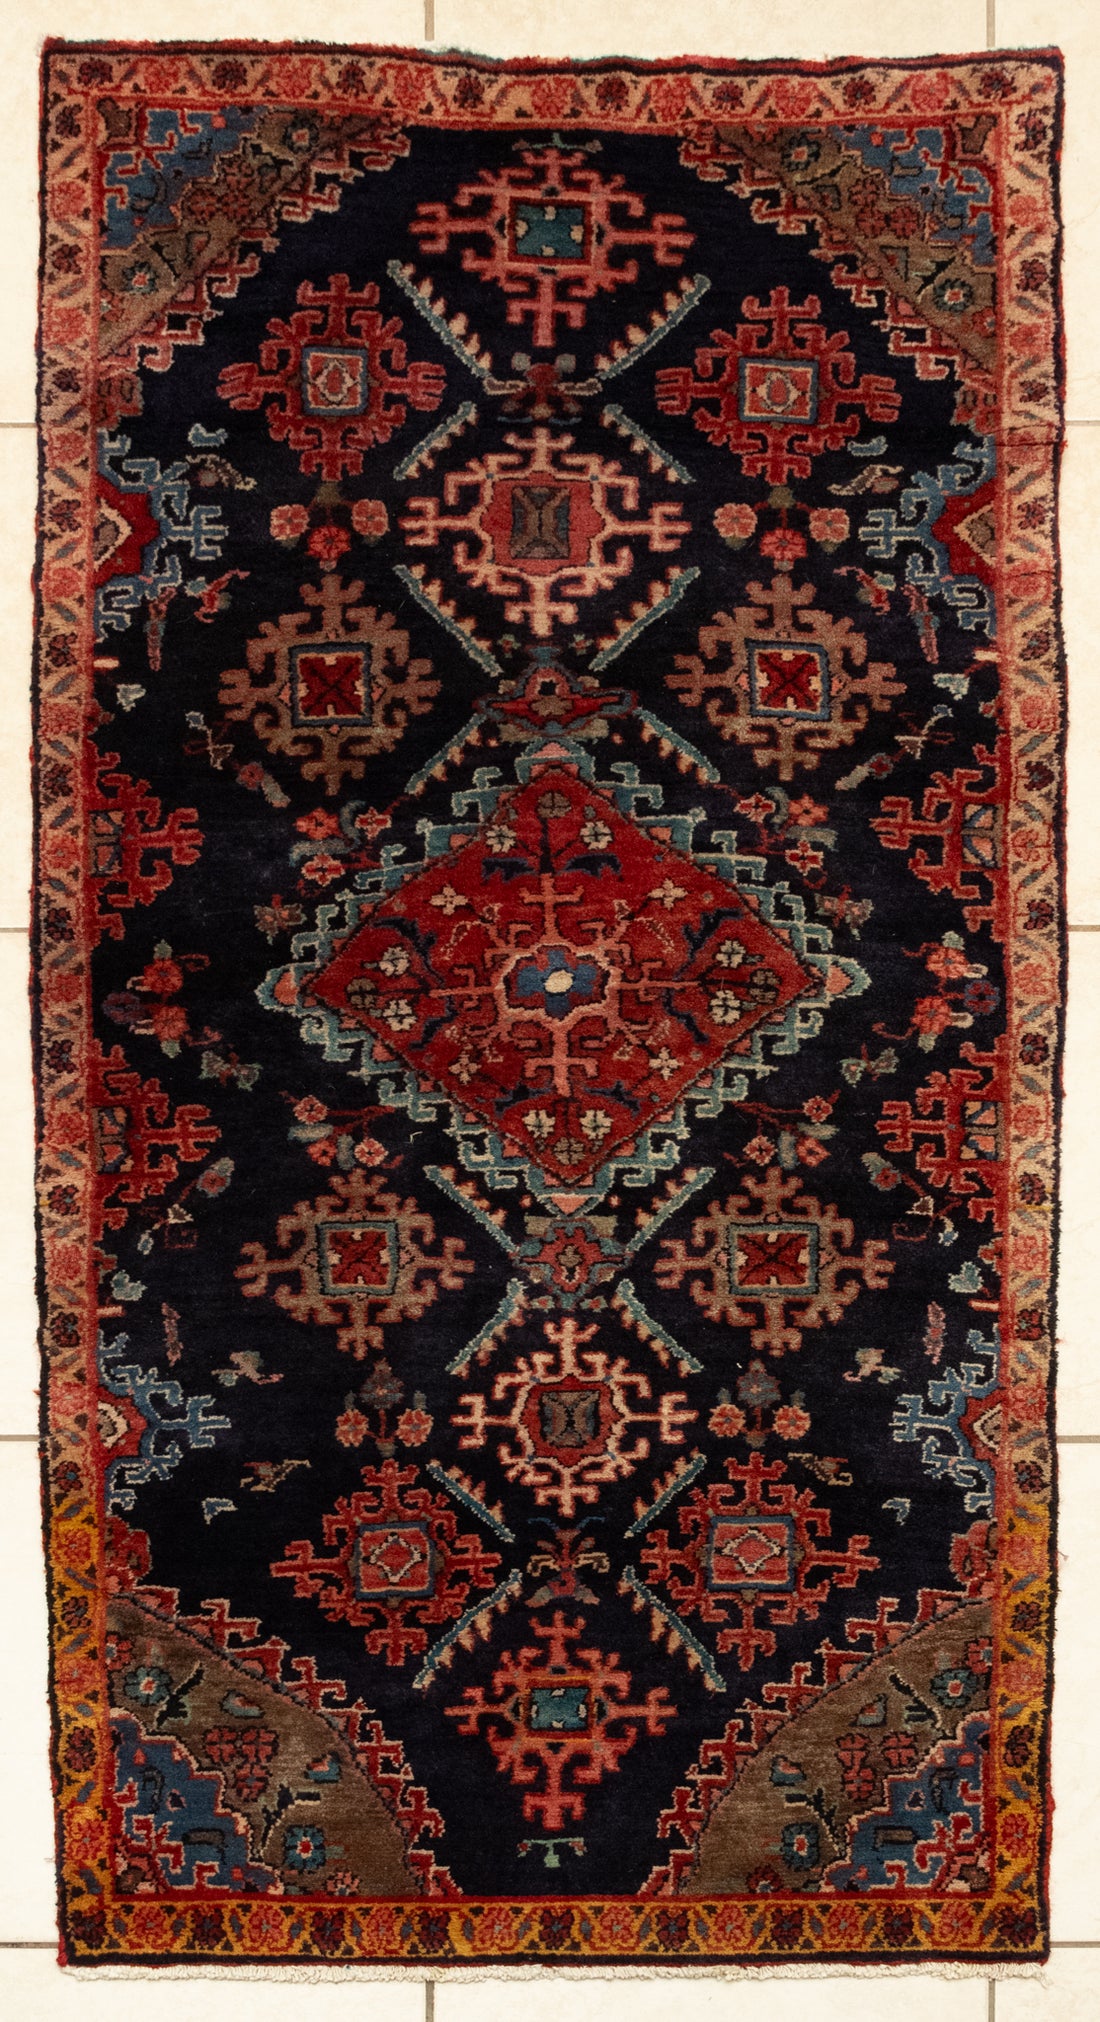 Hand-Knotted Wool Isfahan Rug 5'7" x 2'9"